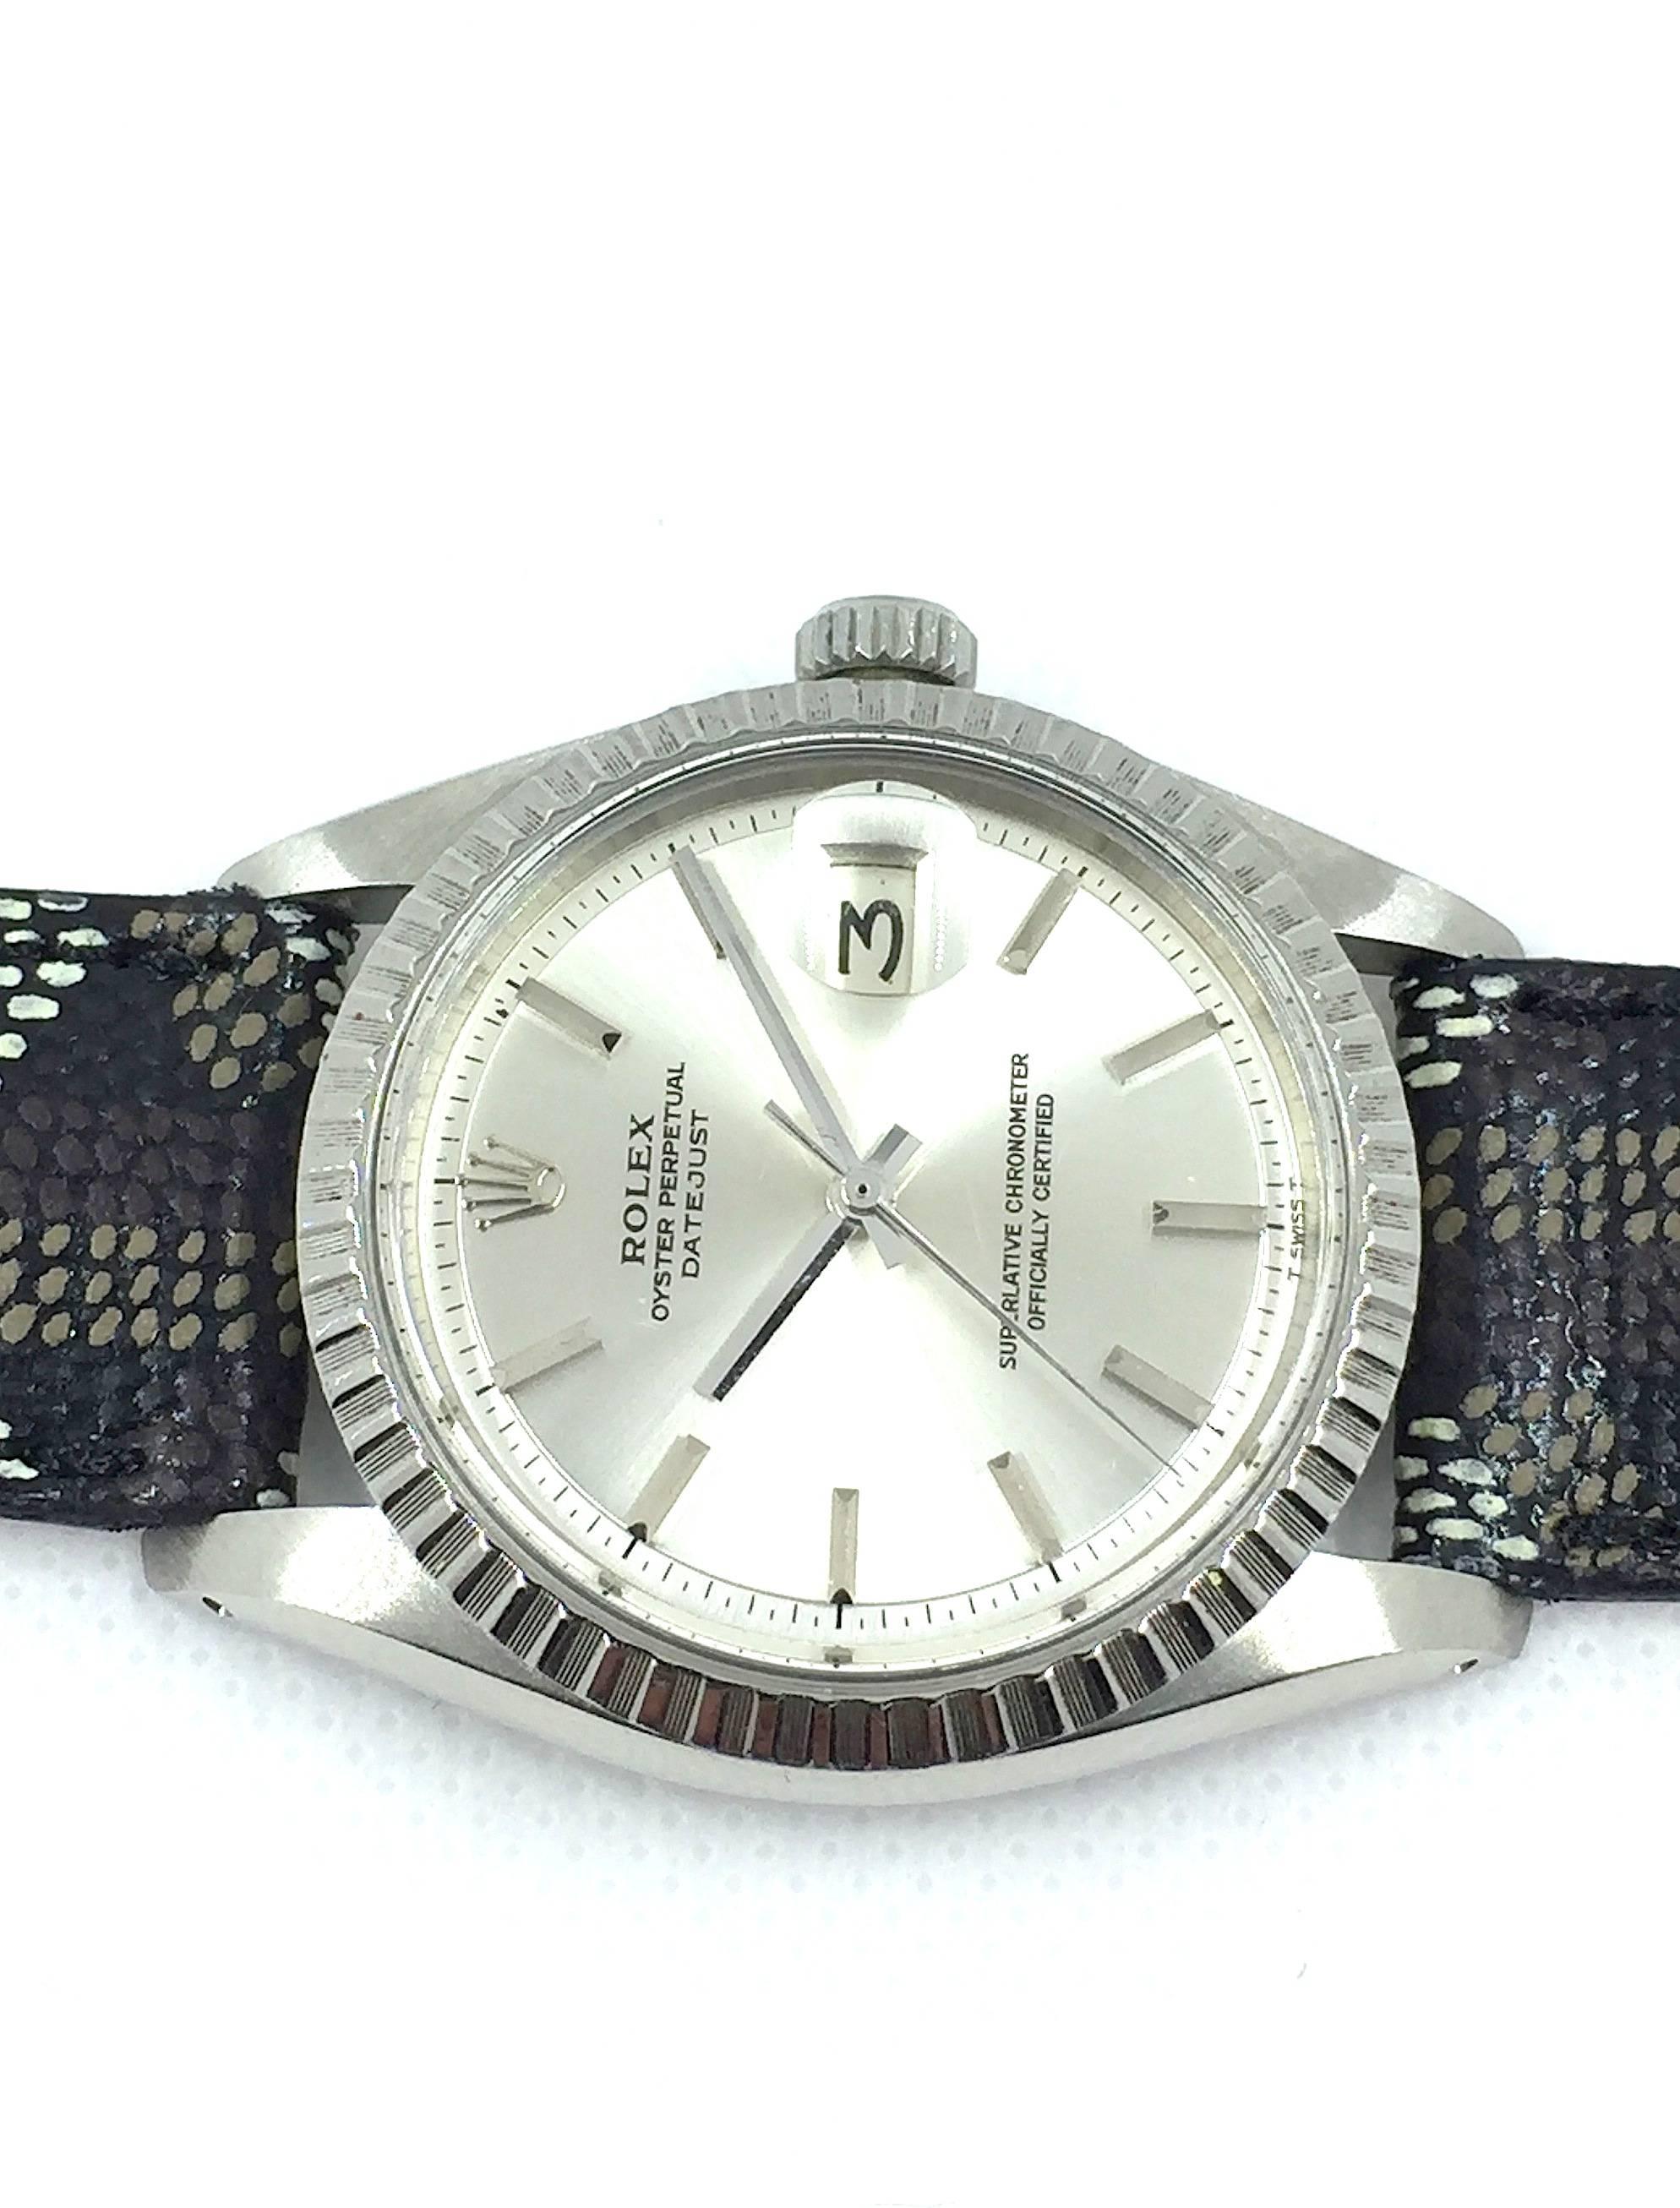 Rolex Stainless Steel Oyster Perpetual Datejust Wristwatch 1